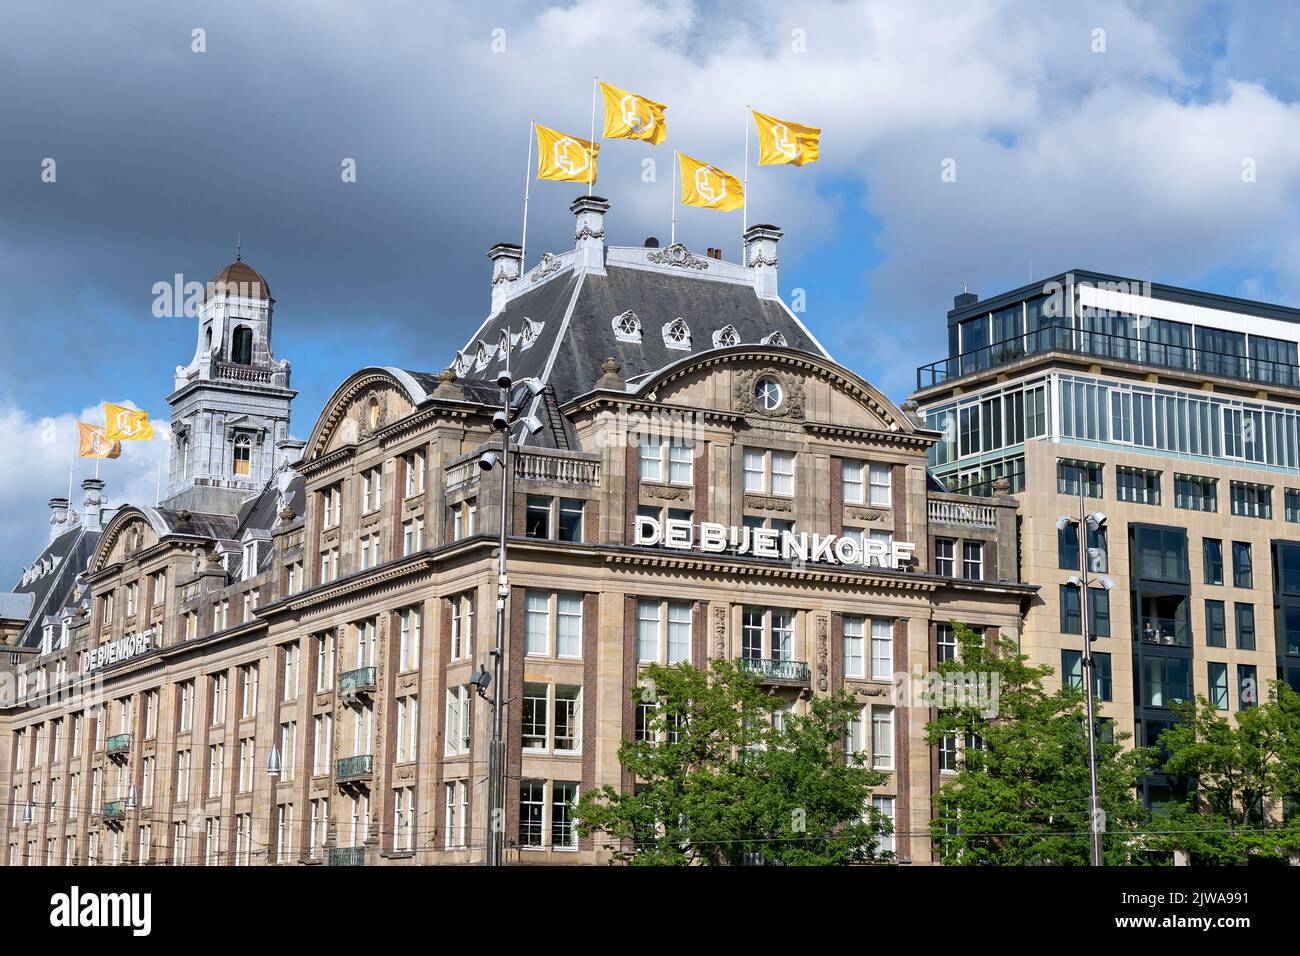 A general view of De Bijenkorf department store in Amsterdam, Holland. Stock Photo